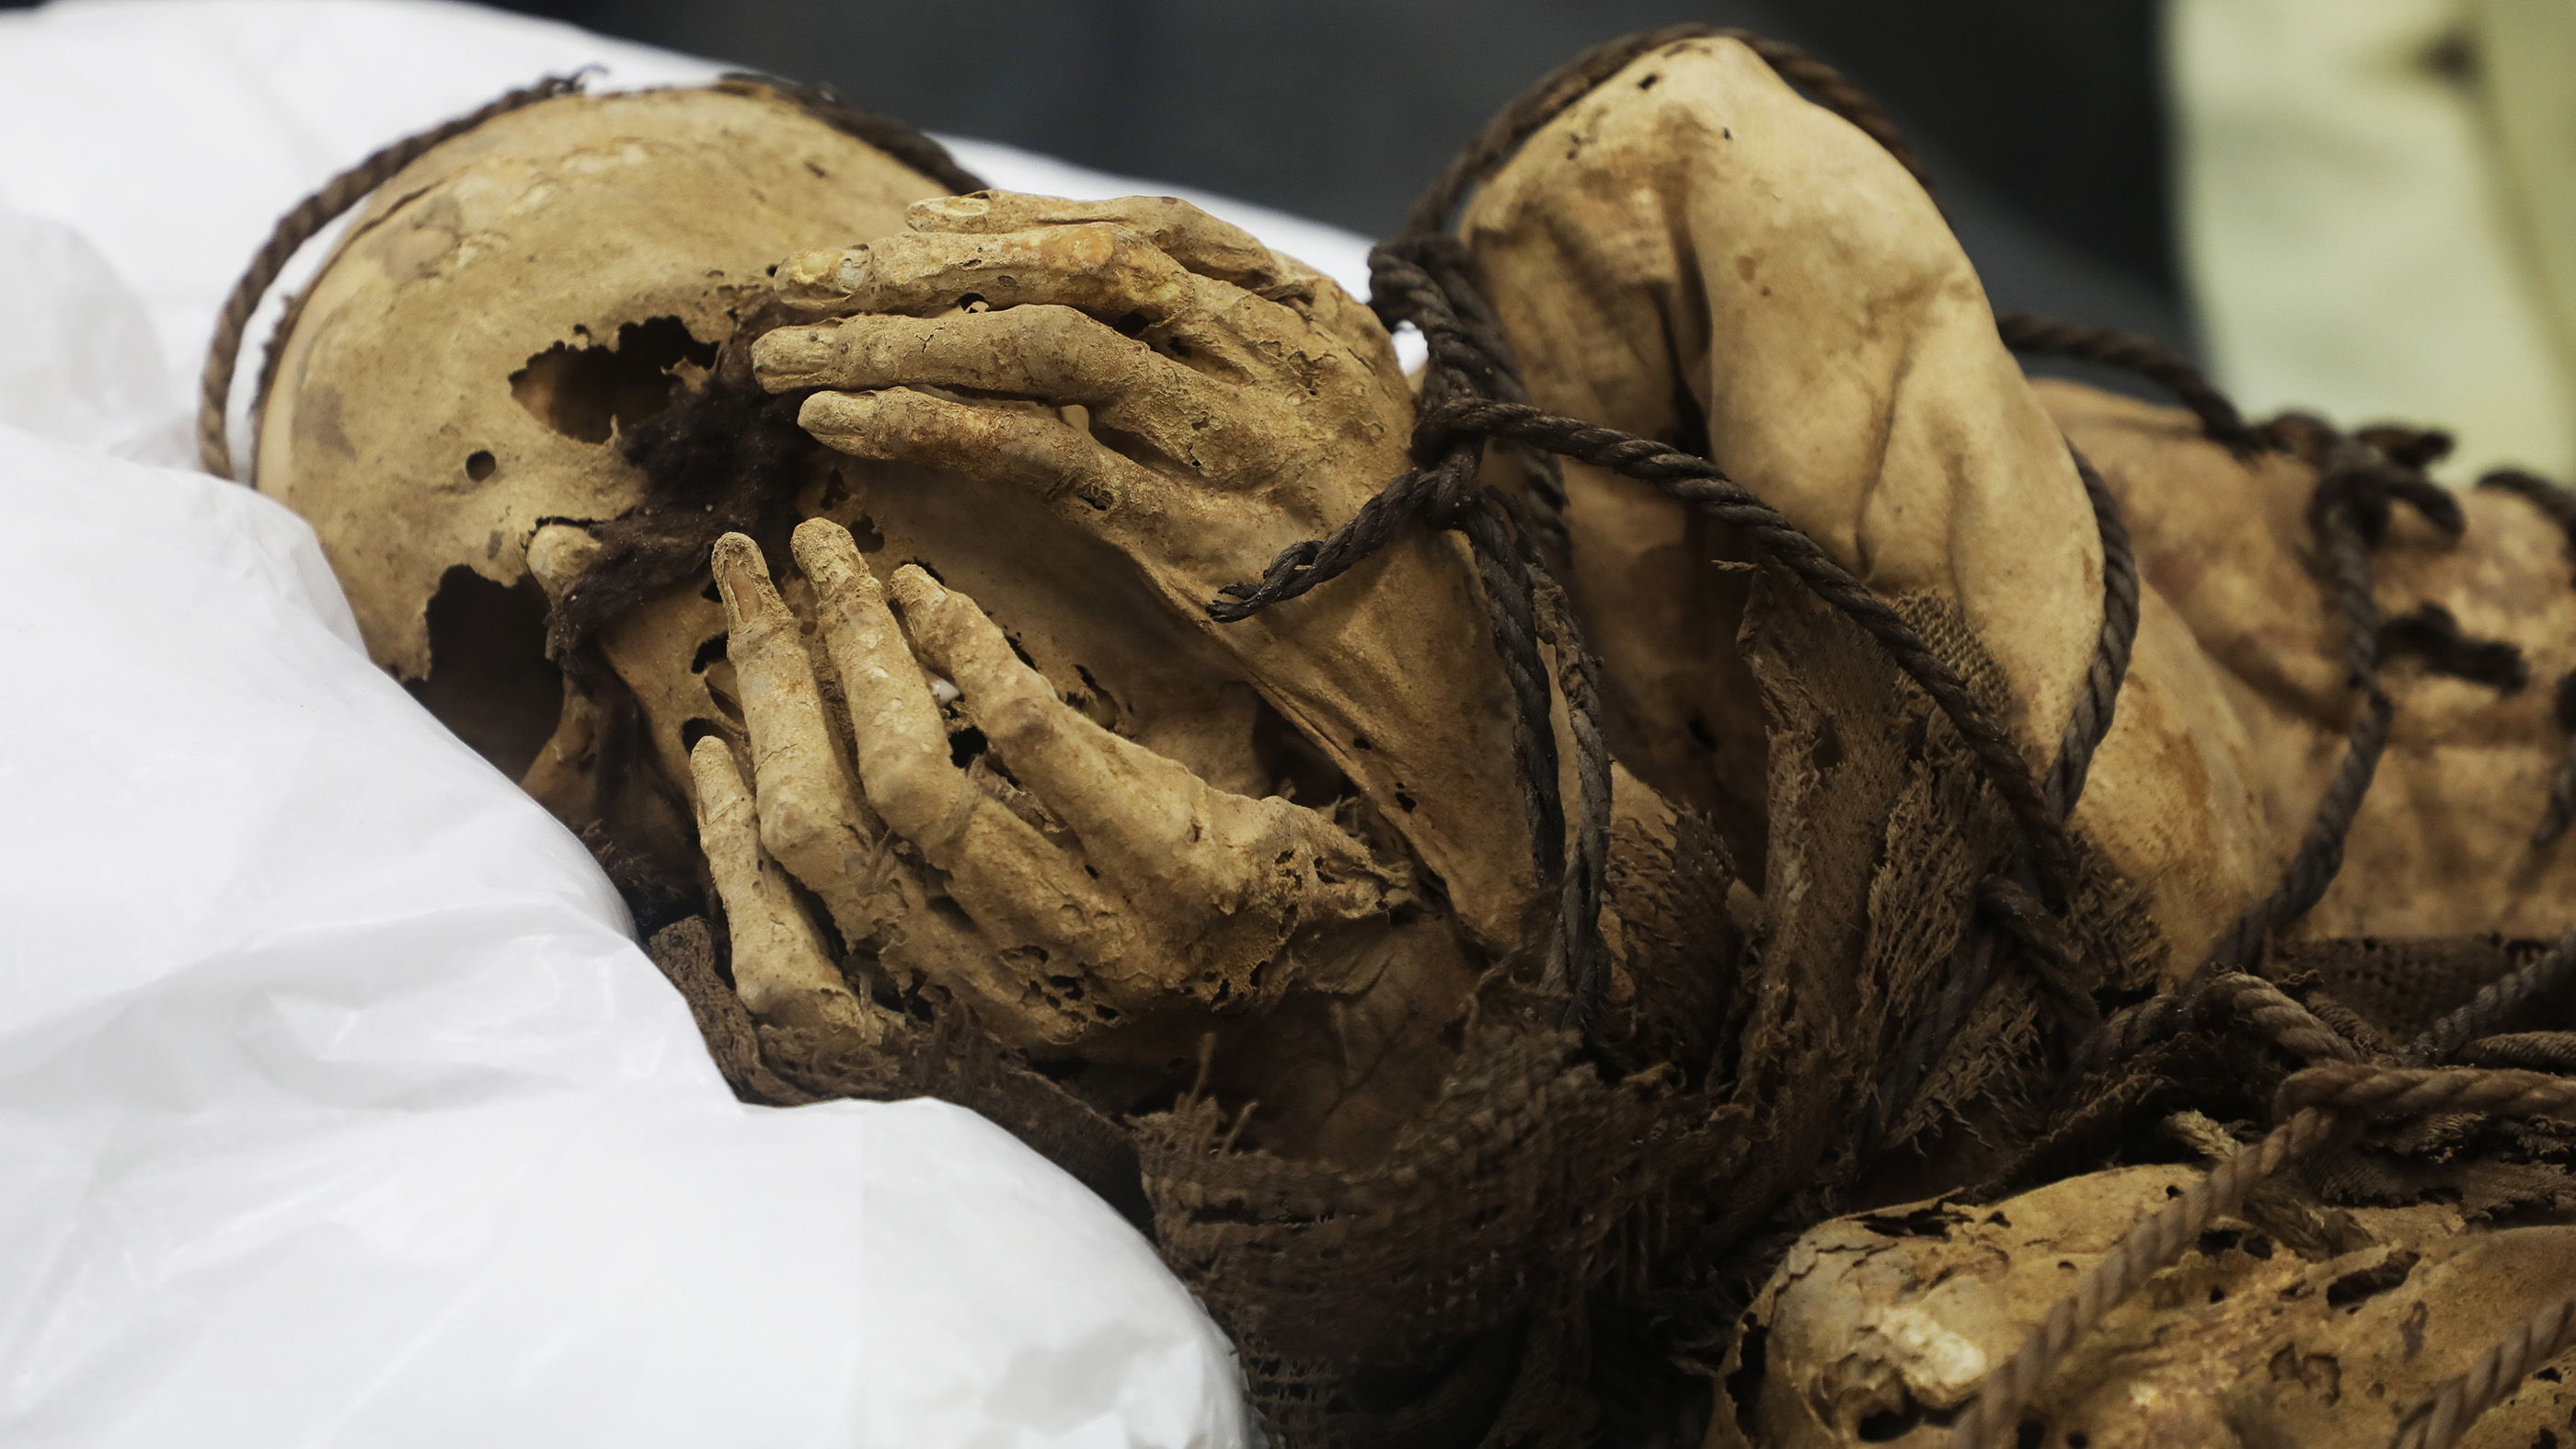 1,000-year-old mummy in fetal position found in underground tomb in Peru thumbnail